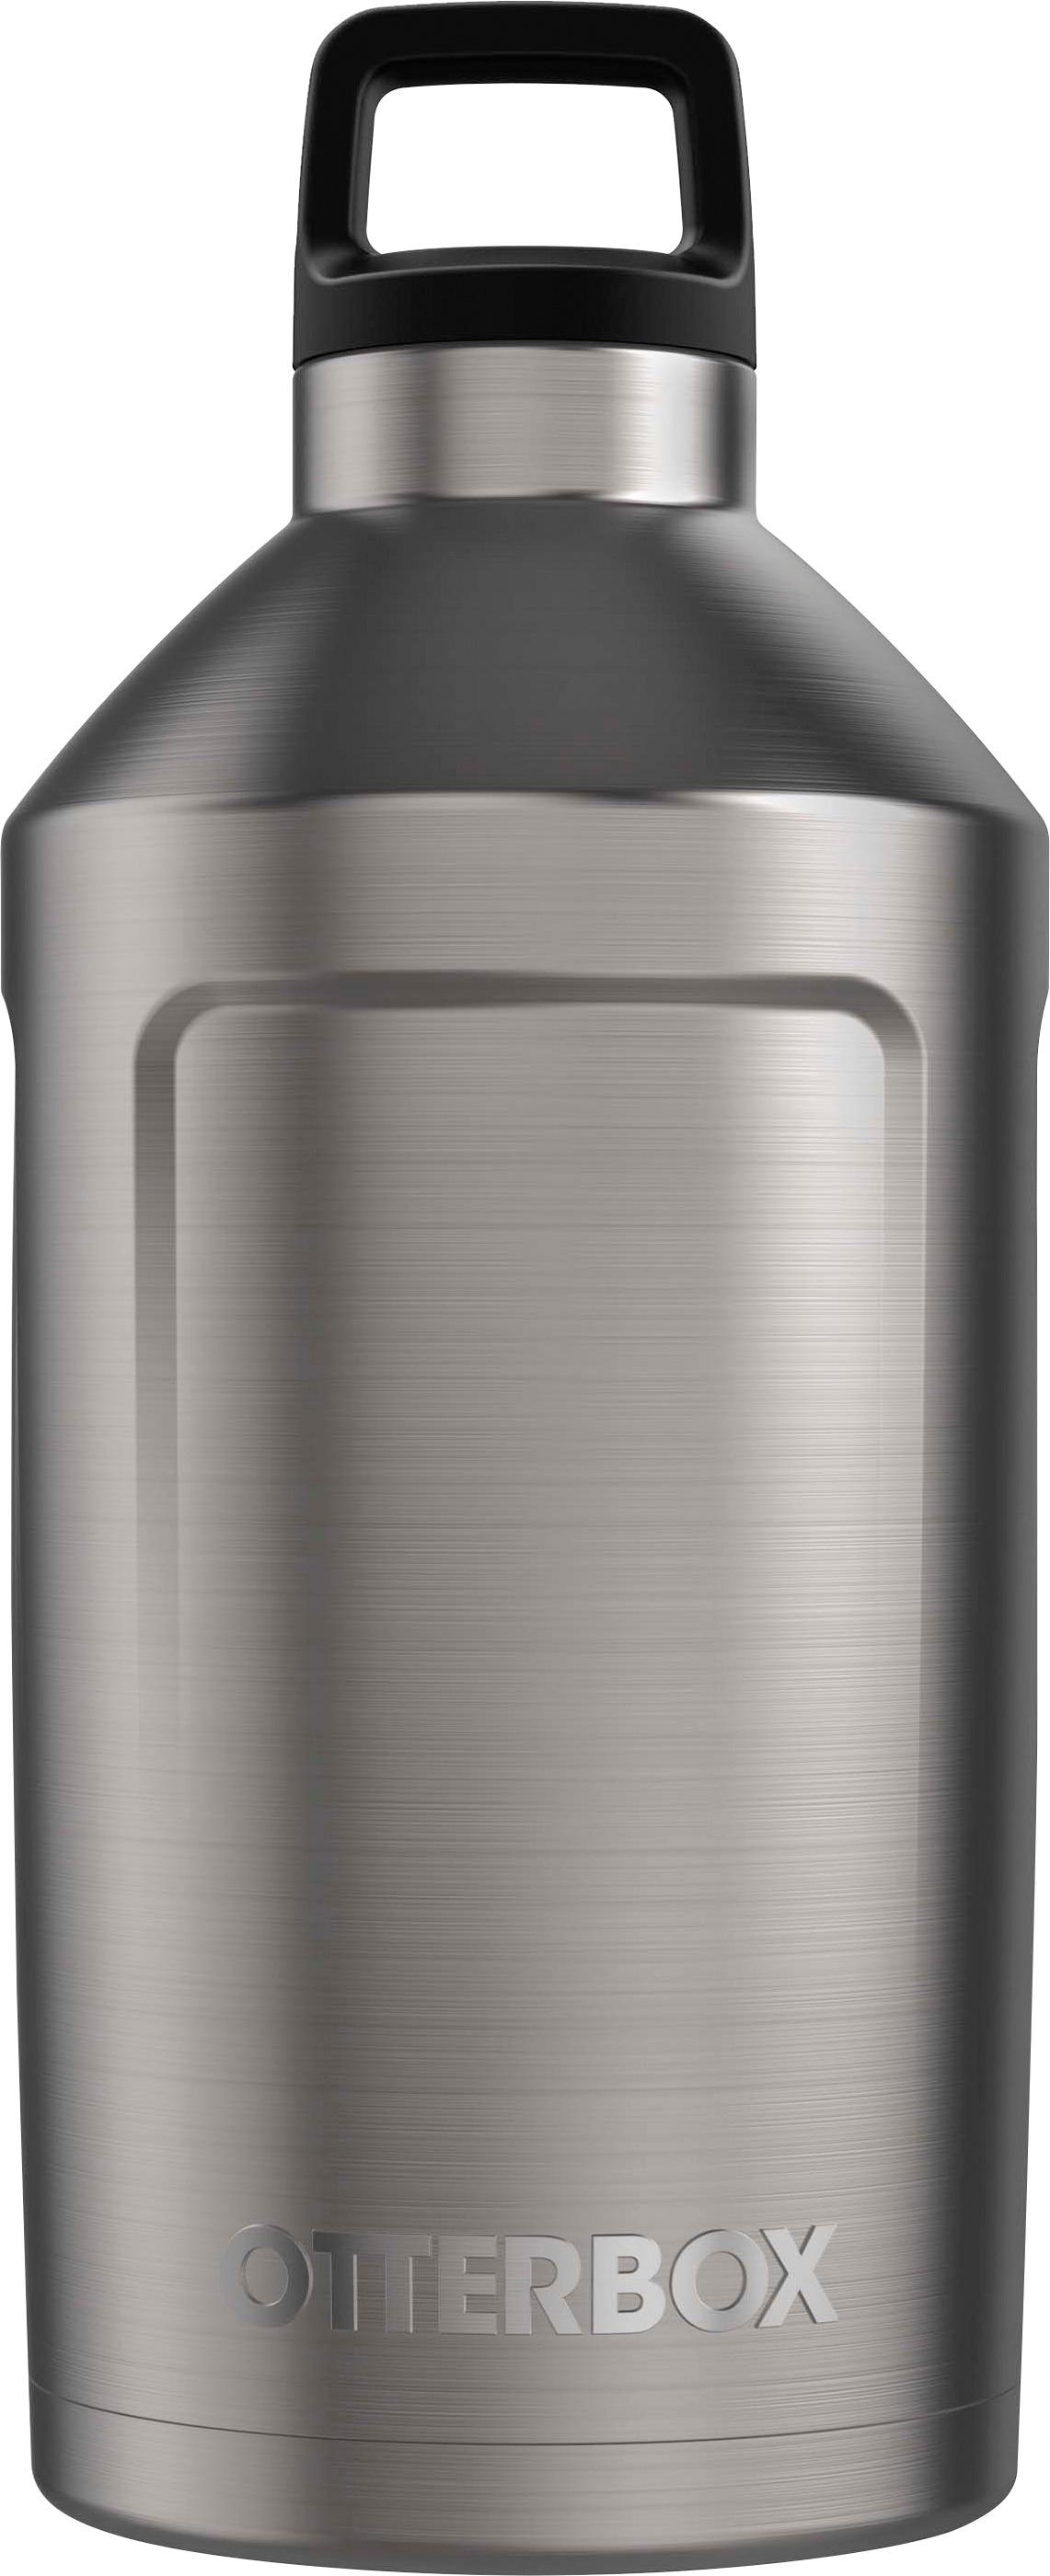 10 Oz Otterbox Elevation Core Colors Stainless Steel Tumbler